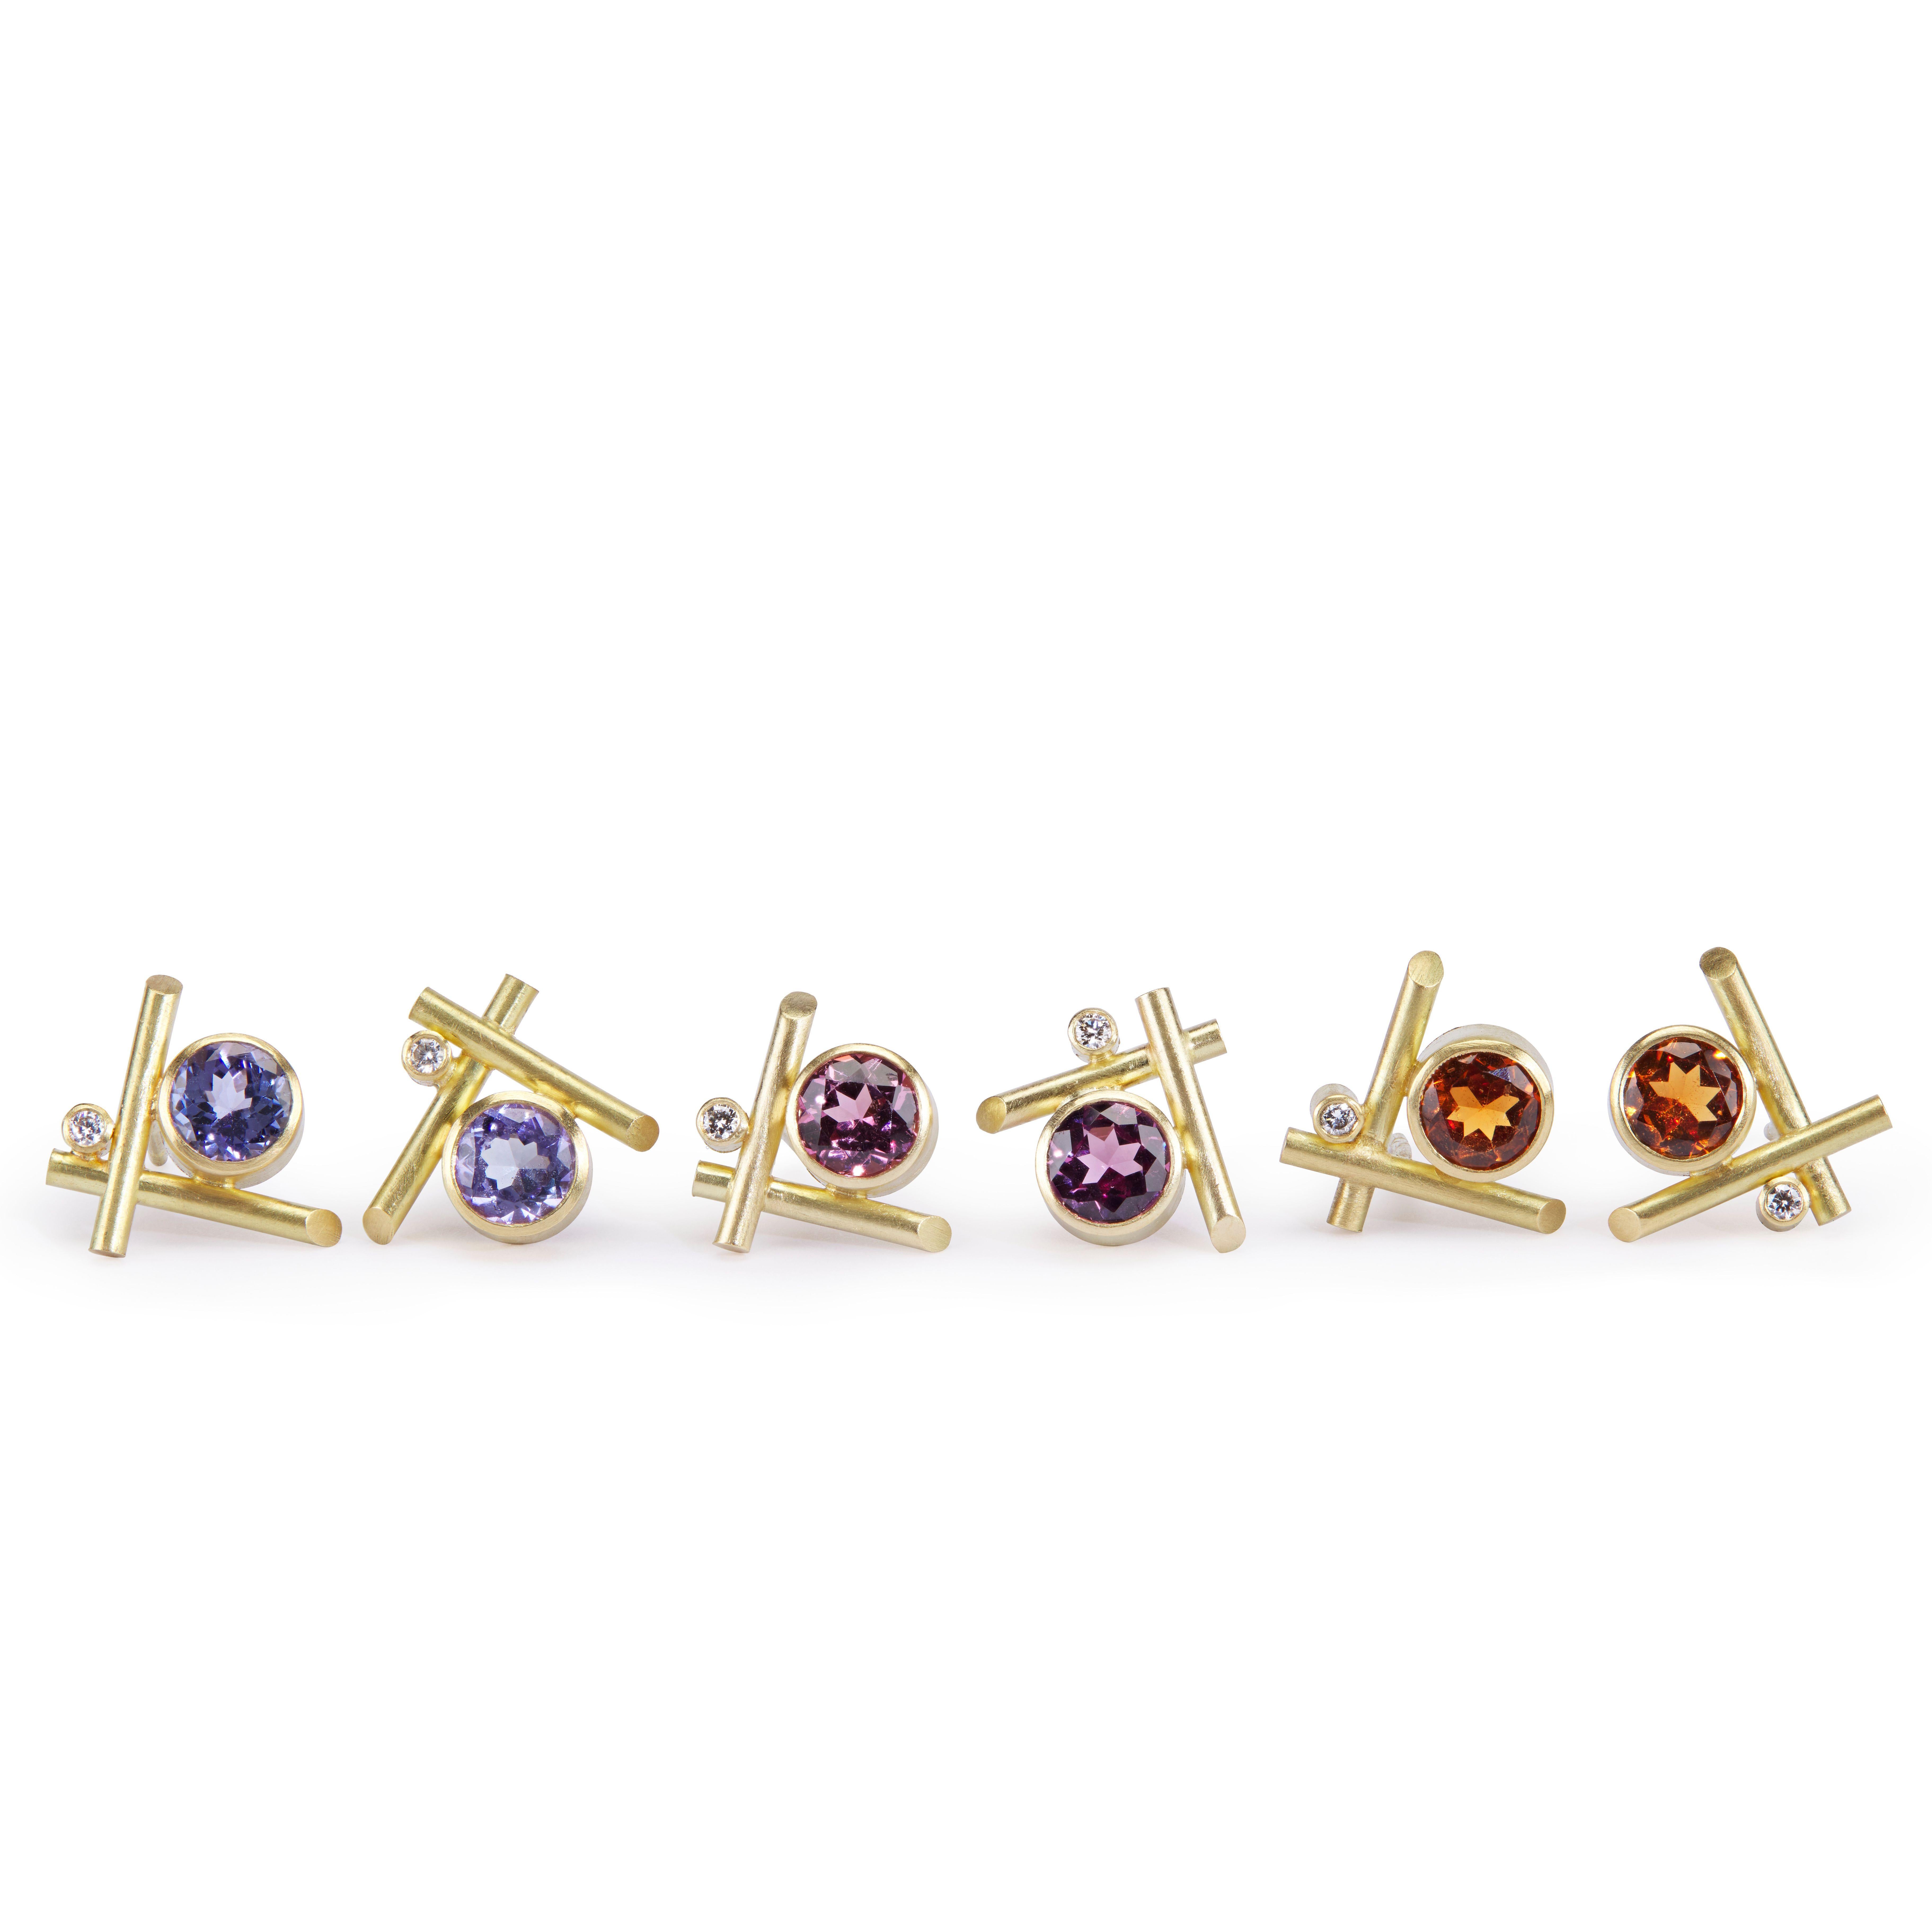 These very contemporary 18K gold stud pierced earrings feature a rhodolite garnet accented by white diamonds. The garnet is a 5mm round. 
These earrings are designed and made by London jeweler, Lucy Martin. Lucy creates art jewelry with a unique